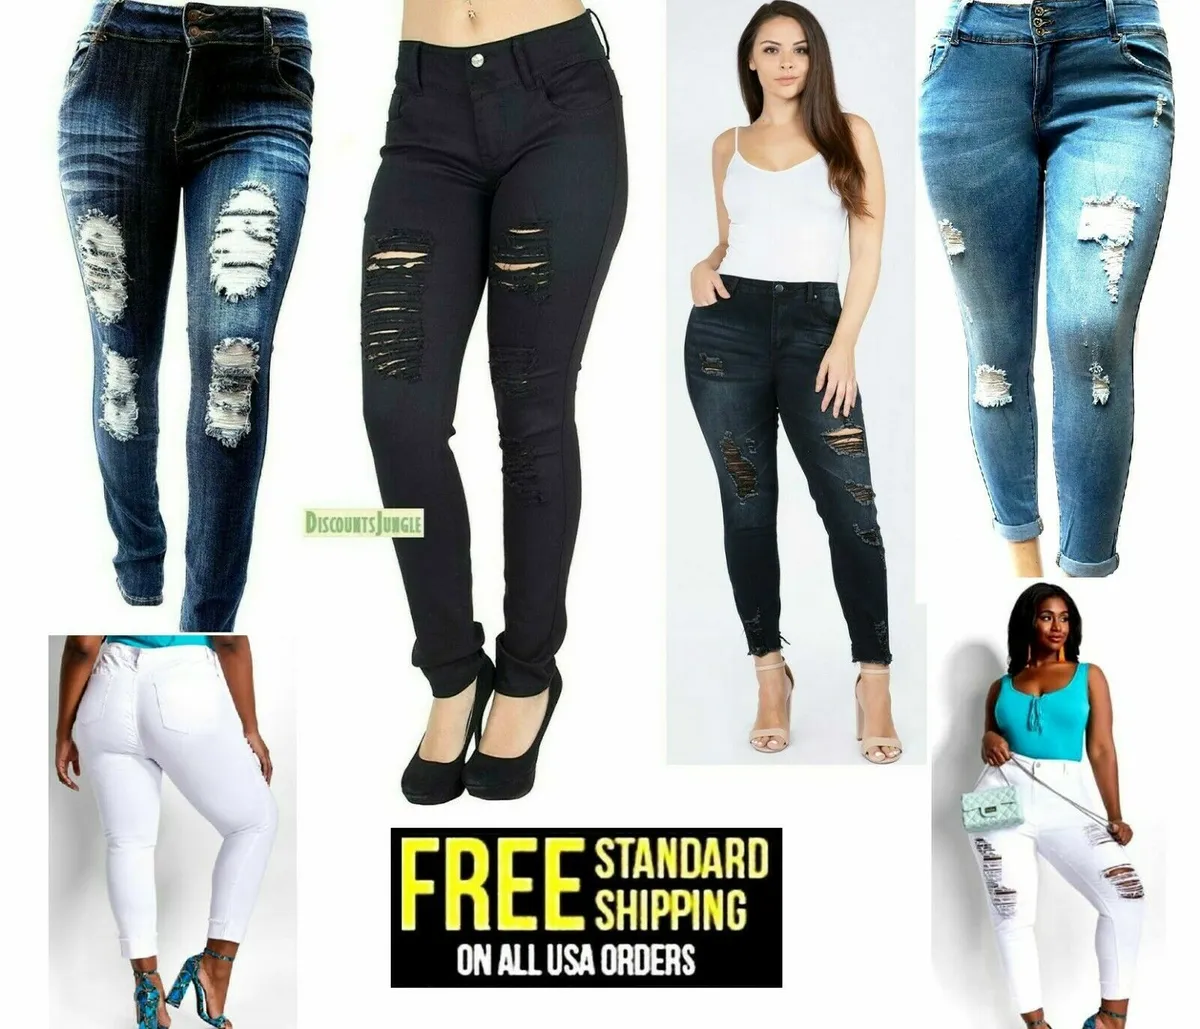 frugthave Thrust Formode WOMENS PLUS SIZE JEANS Stretch Distressed Ripped SKINNY DENIM PANTS 14 to  34 | eBay